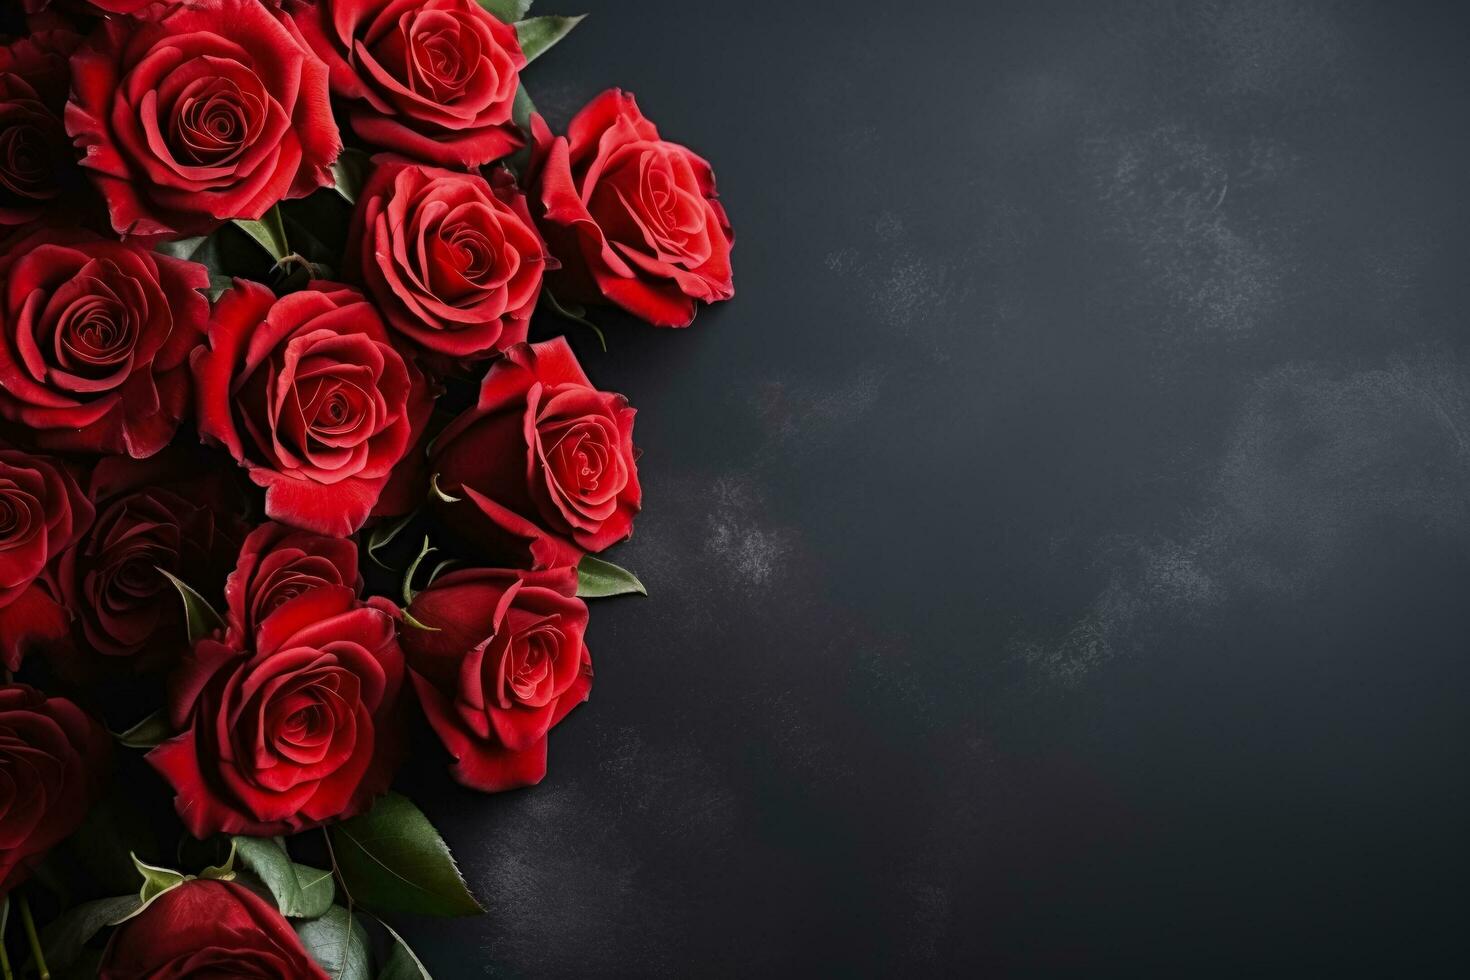 Funeral red roses on dark background with copy space photo